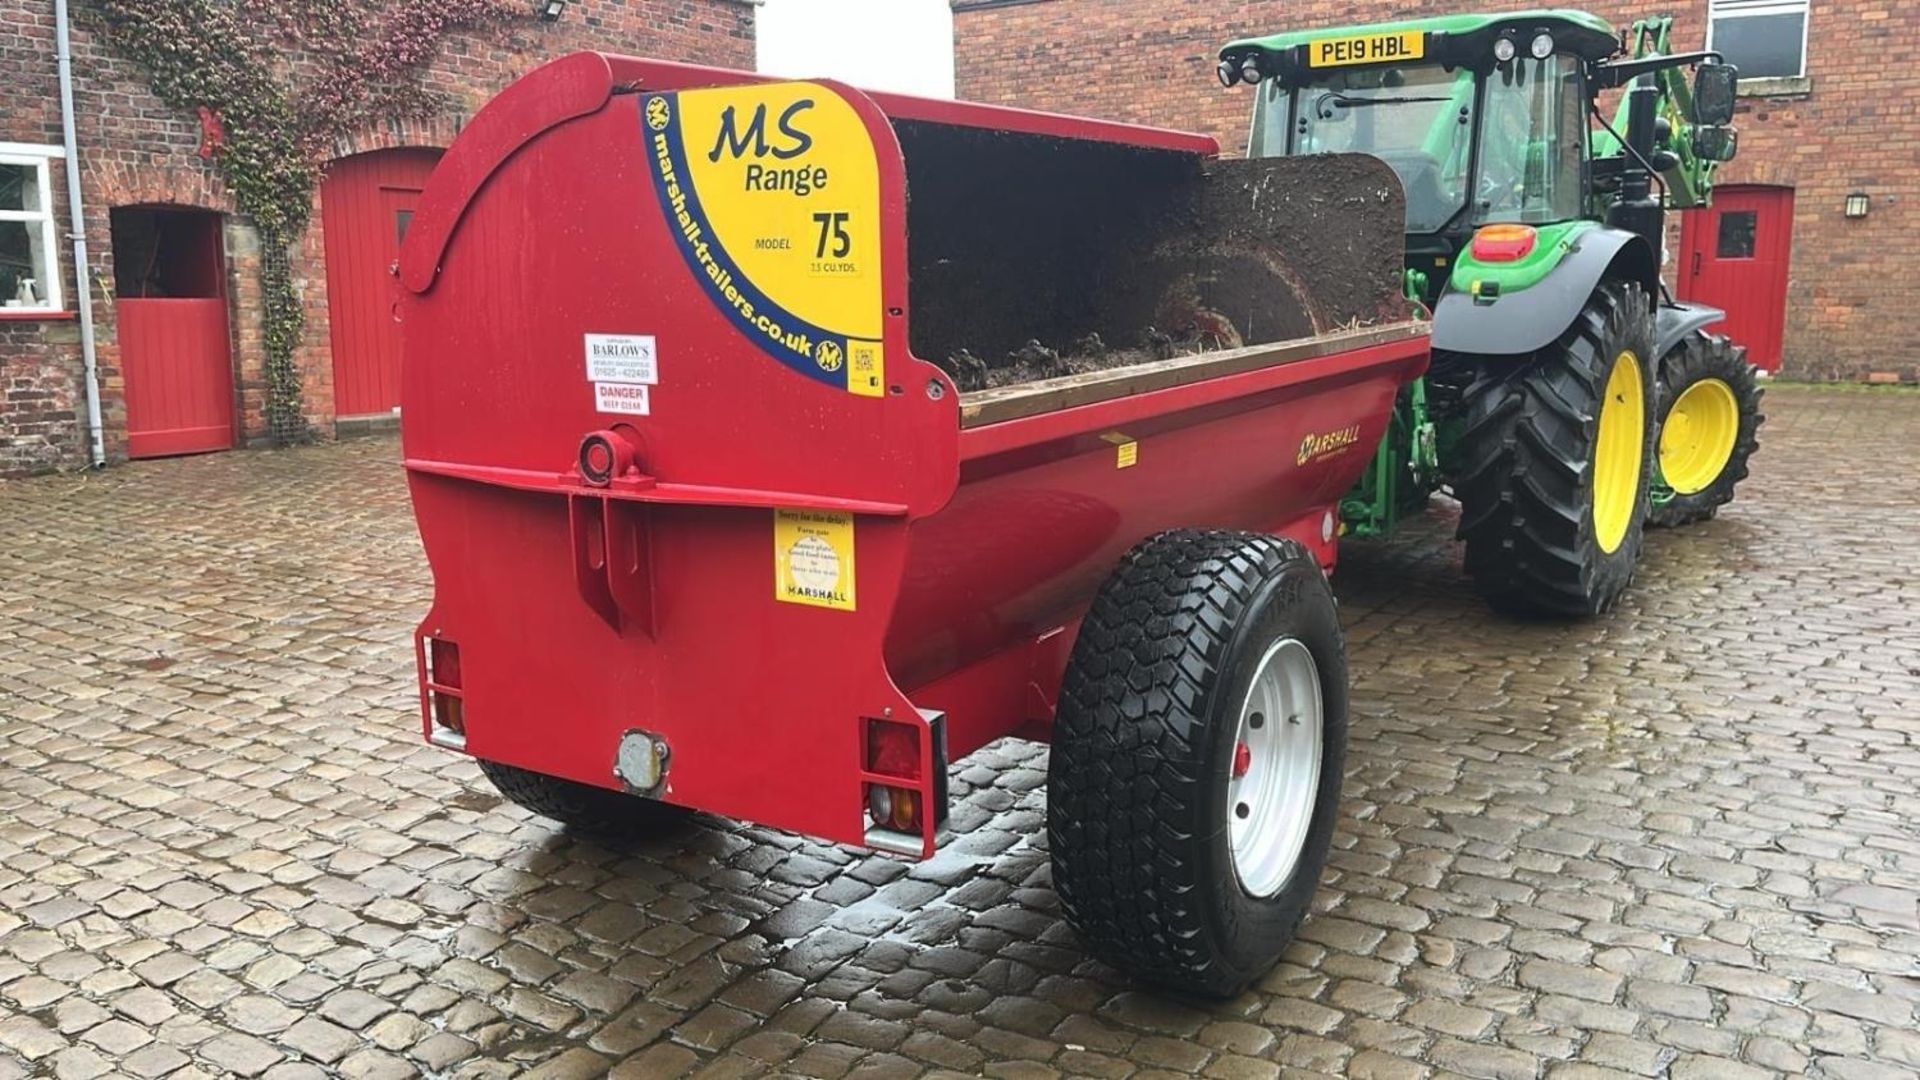 2016 MARSHALL MS 75 ROTARY MANURE SPREADER 7.5 CUBIC YARDS CARRYING CAPACITY 5 TONNE SERIAL NUMBER - Image 3 of 13